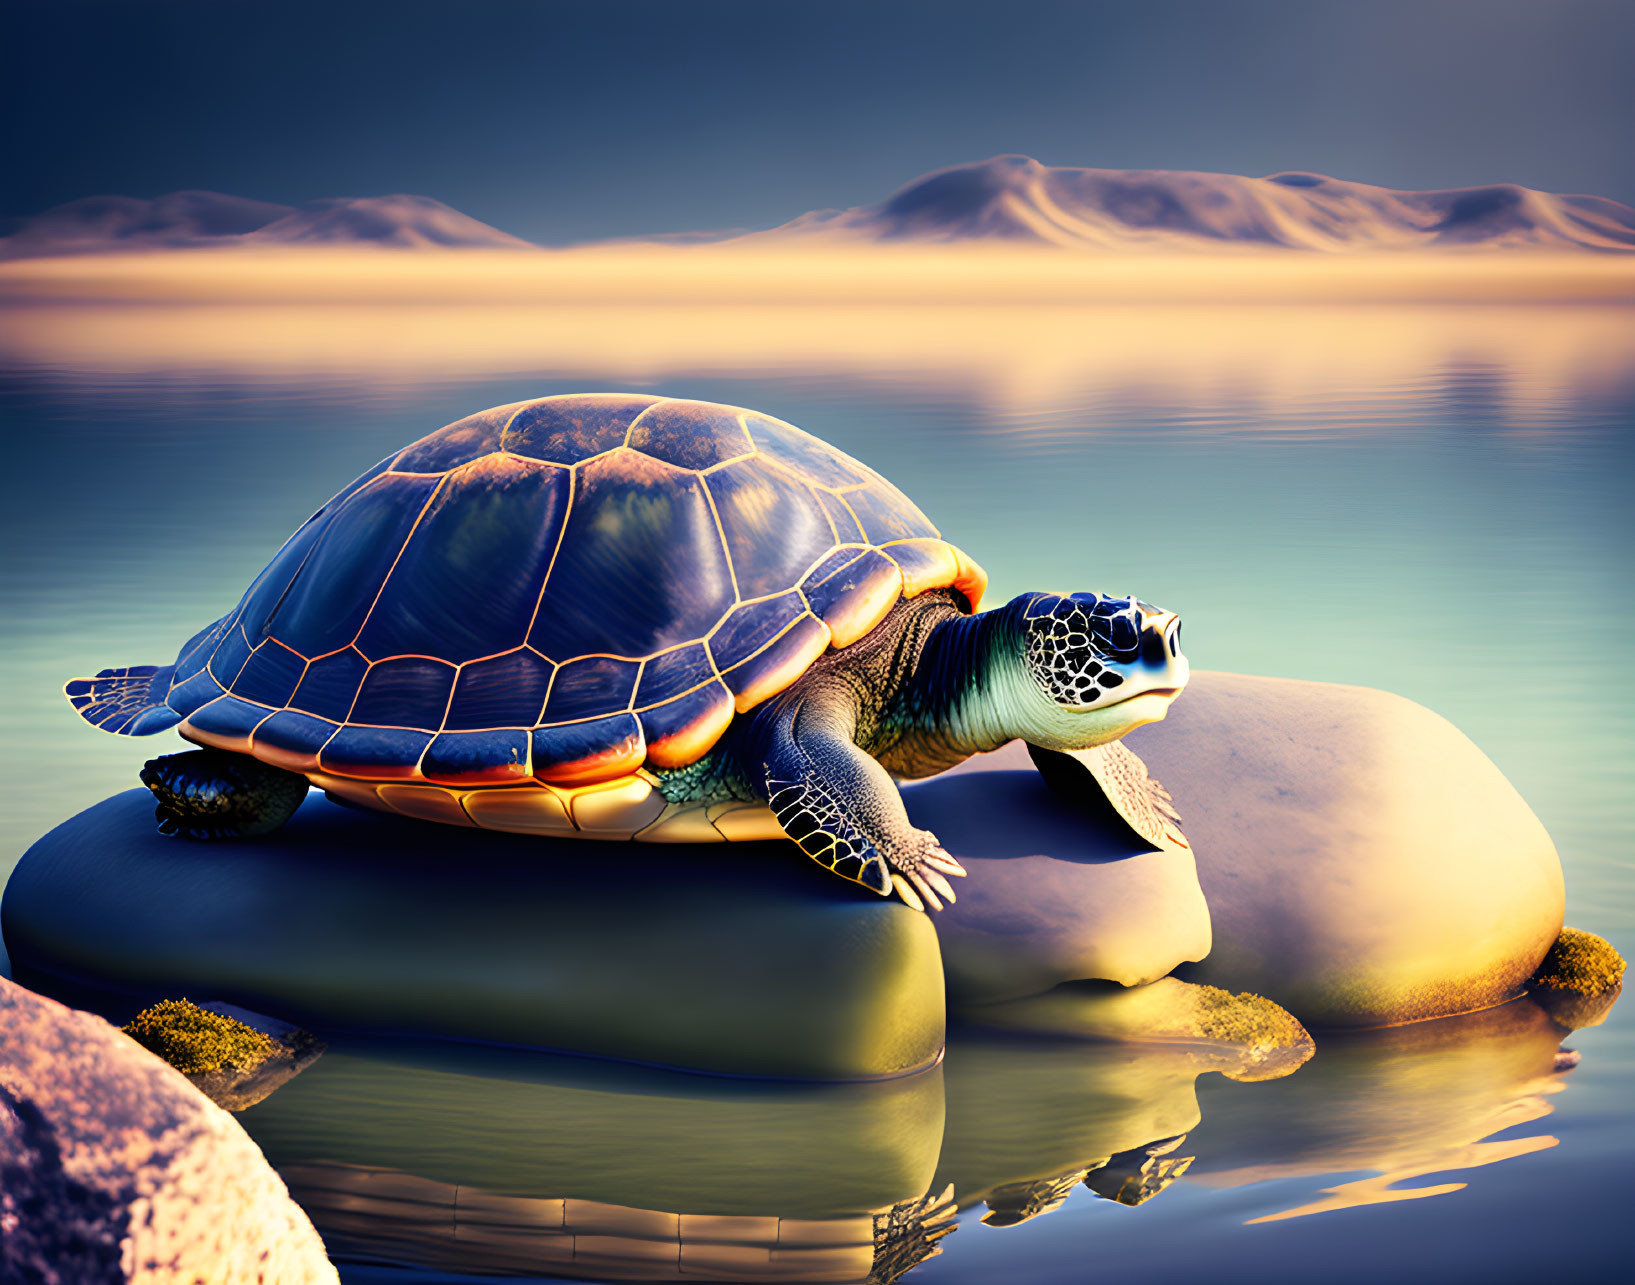 Tranquil sunset scene with turtle on stone in calm waters